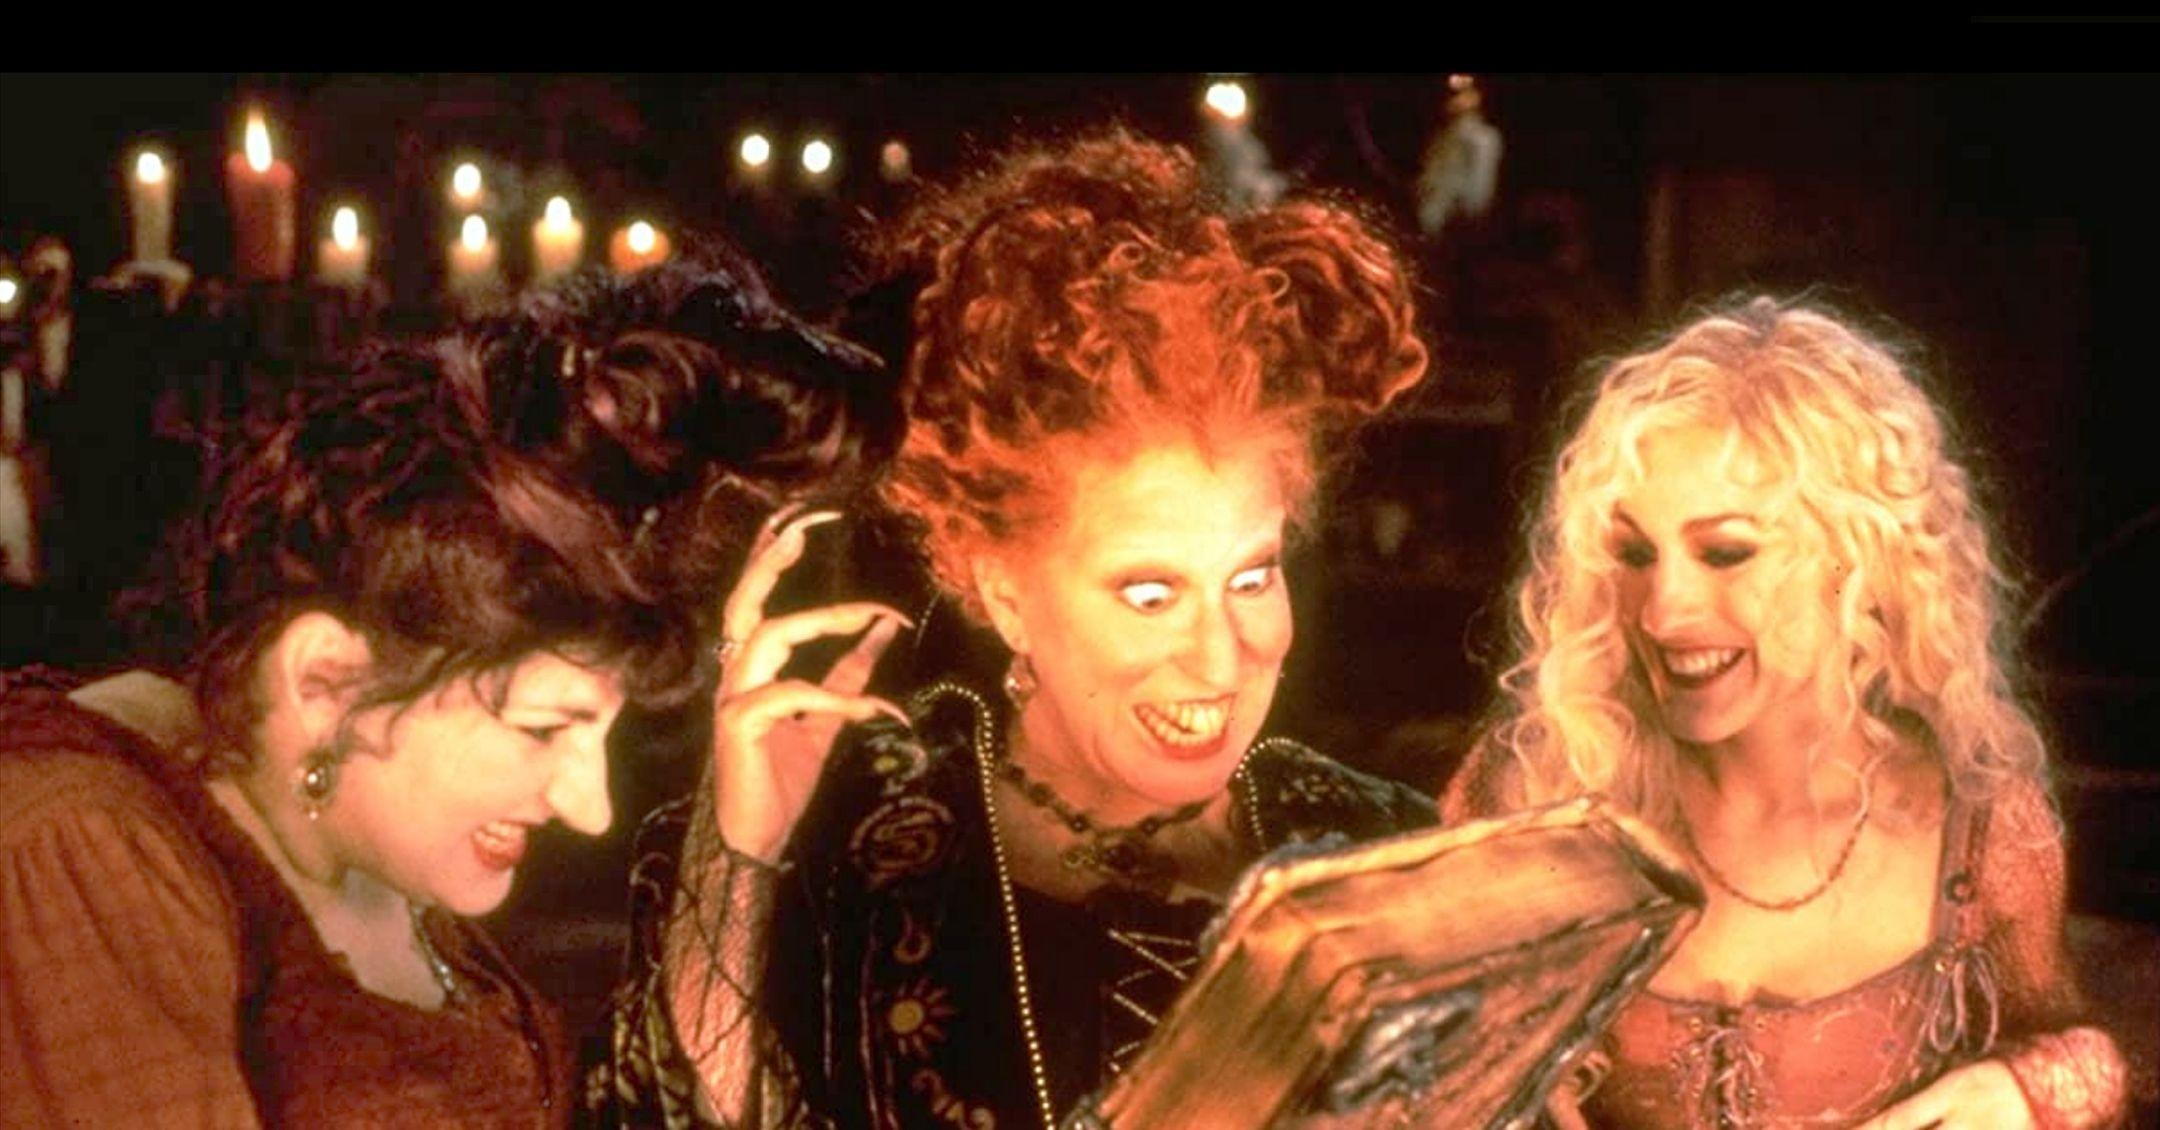 Hocus Pocus 2' Trailer: The Sanderson Sisters Are Back